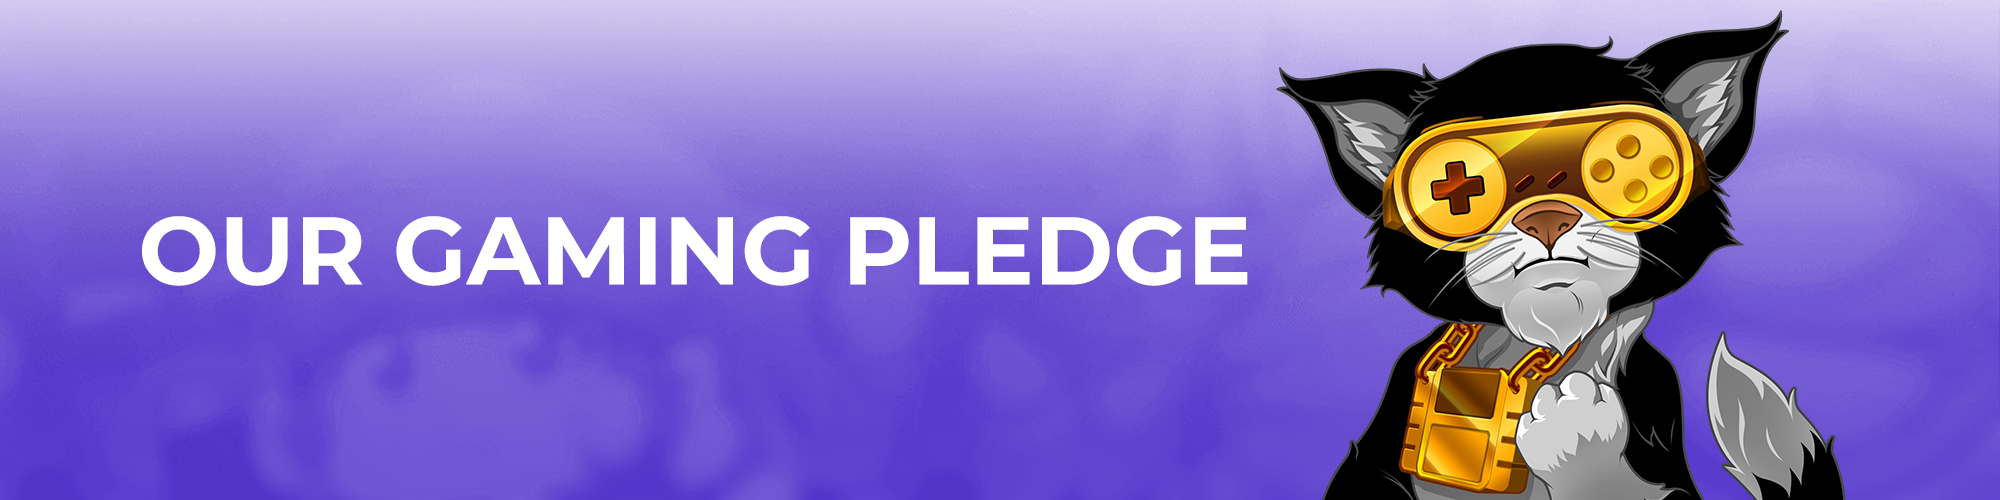 Banners_Our-Gaming-Pledge.png__PID:284e017e-d0b0-4c23-85e7-3b74f7c65312